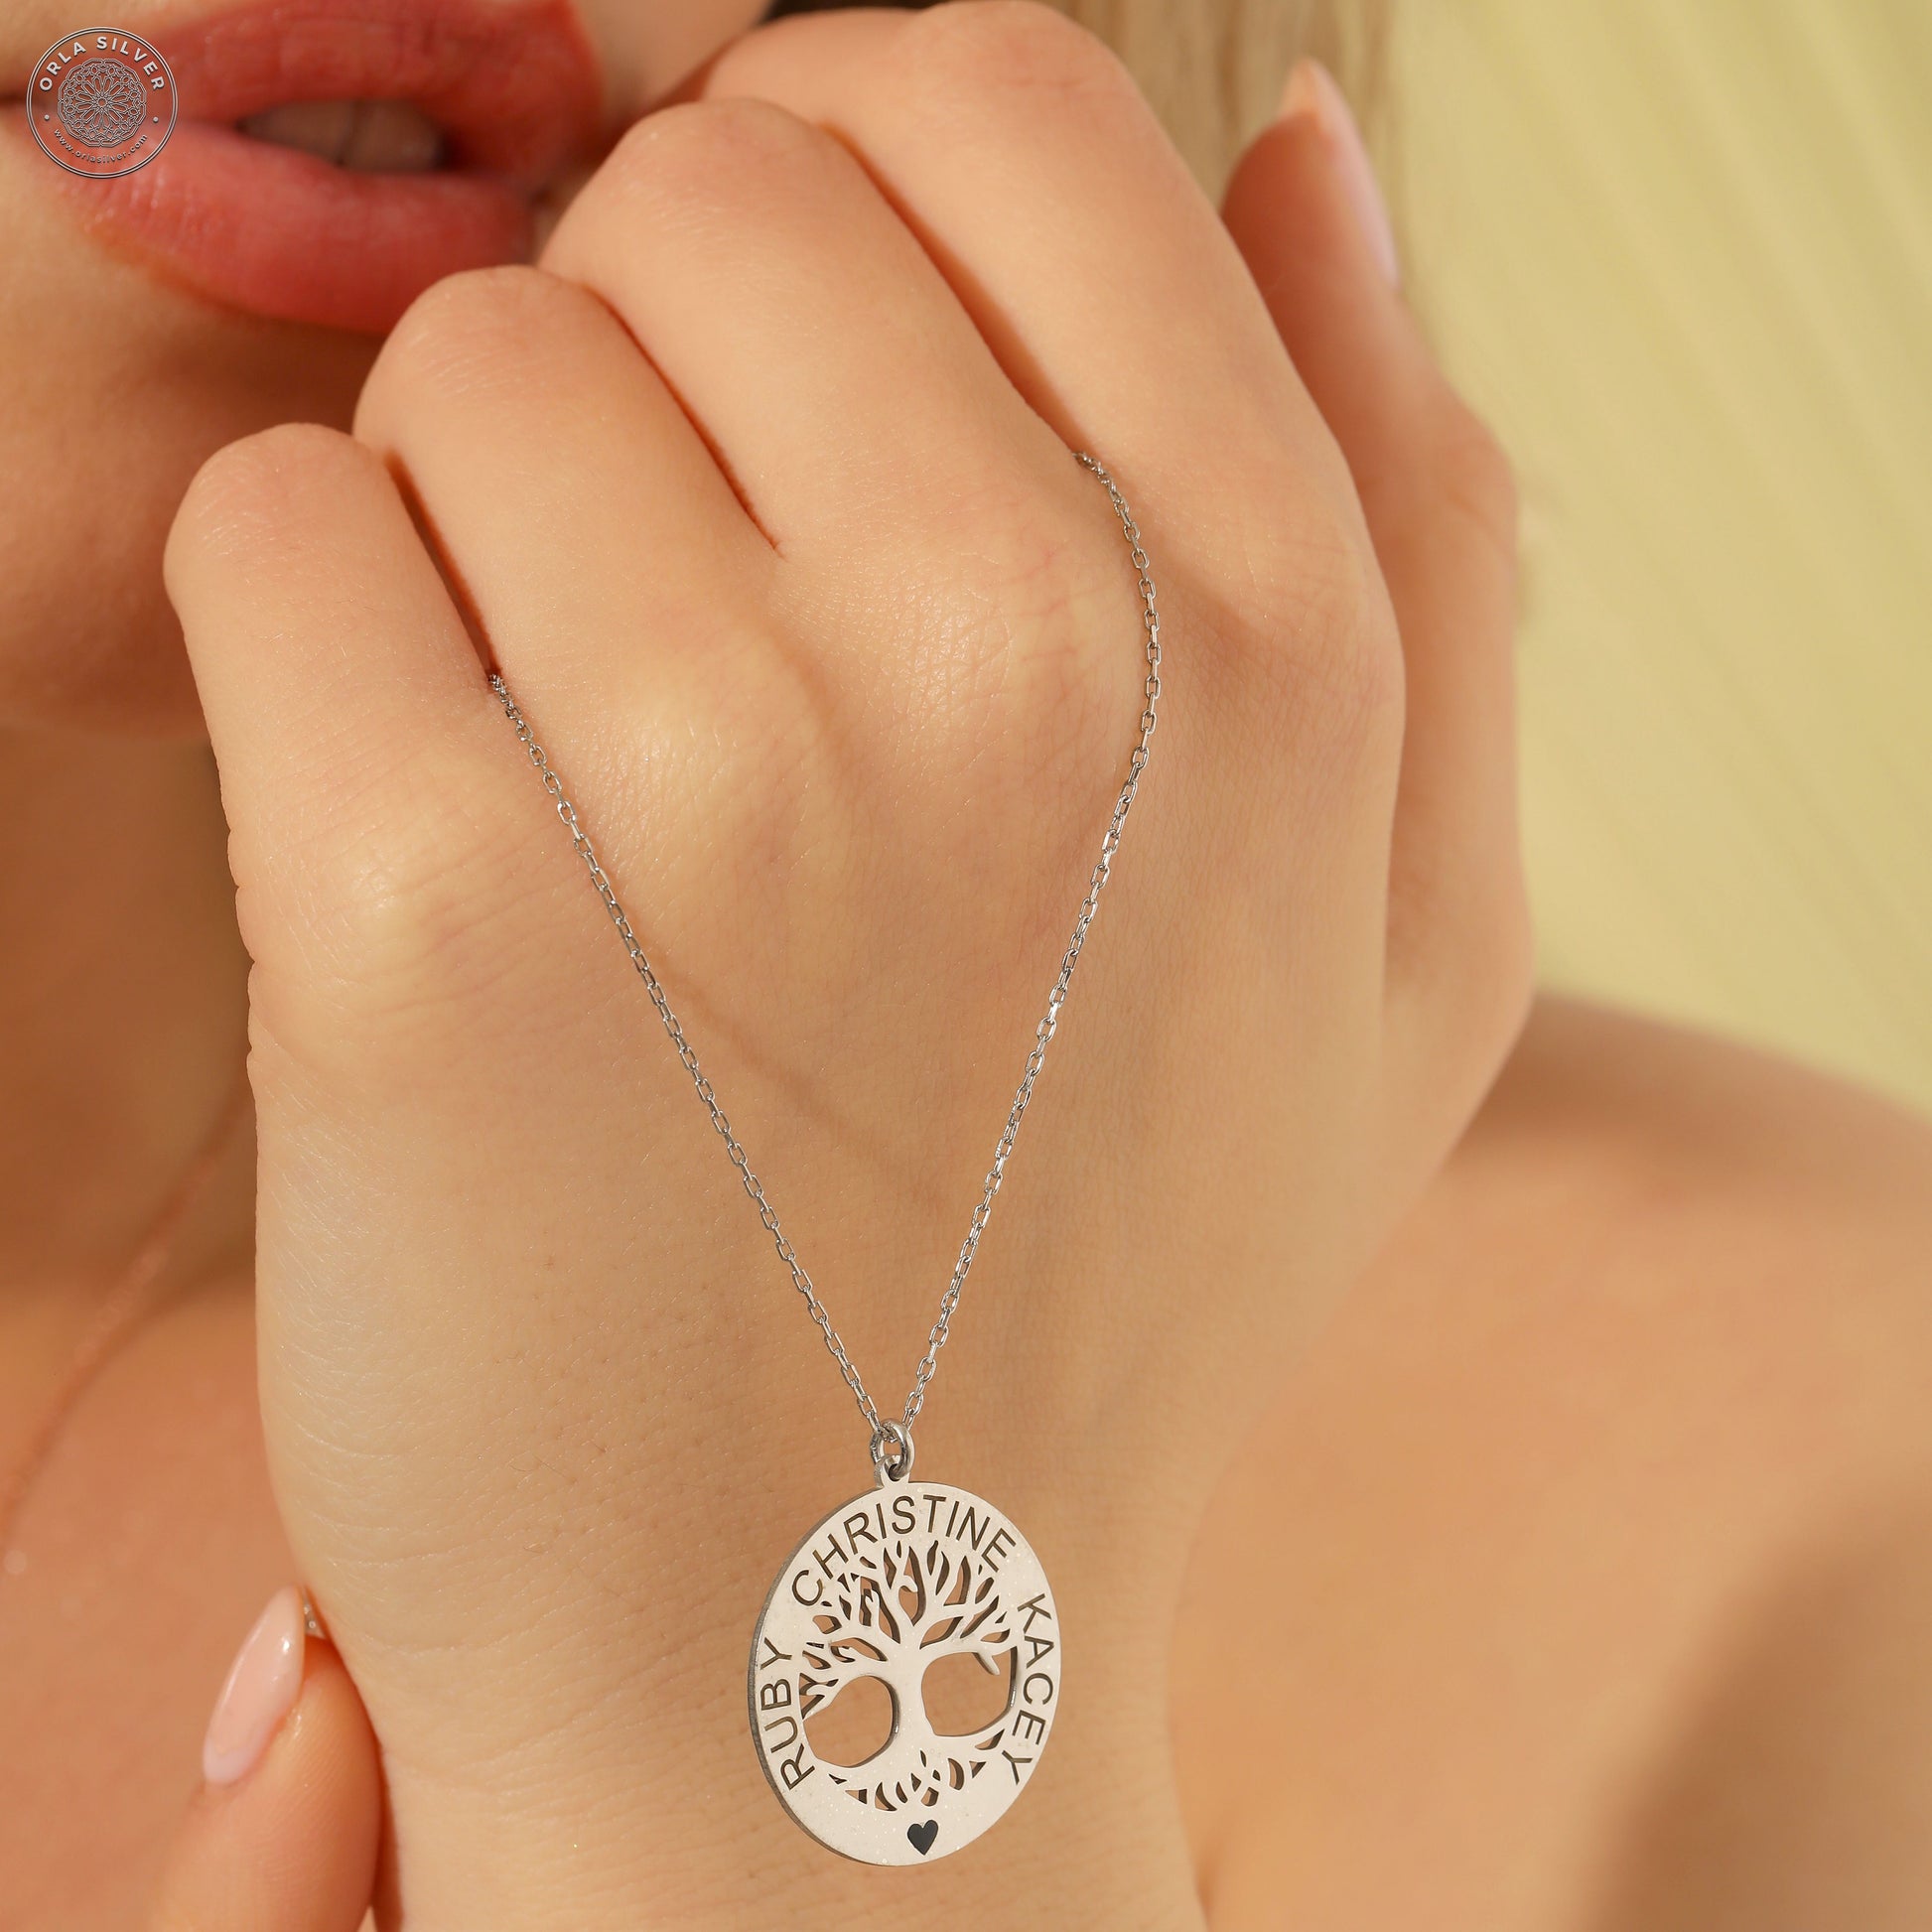 Name Engraved 925 Sterling Silver Tree of Life Women's Necklace Silver